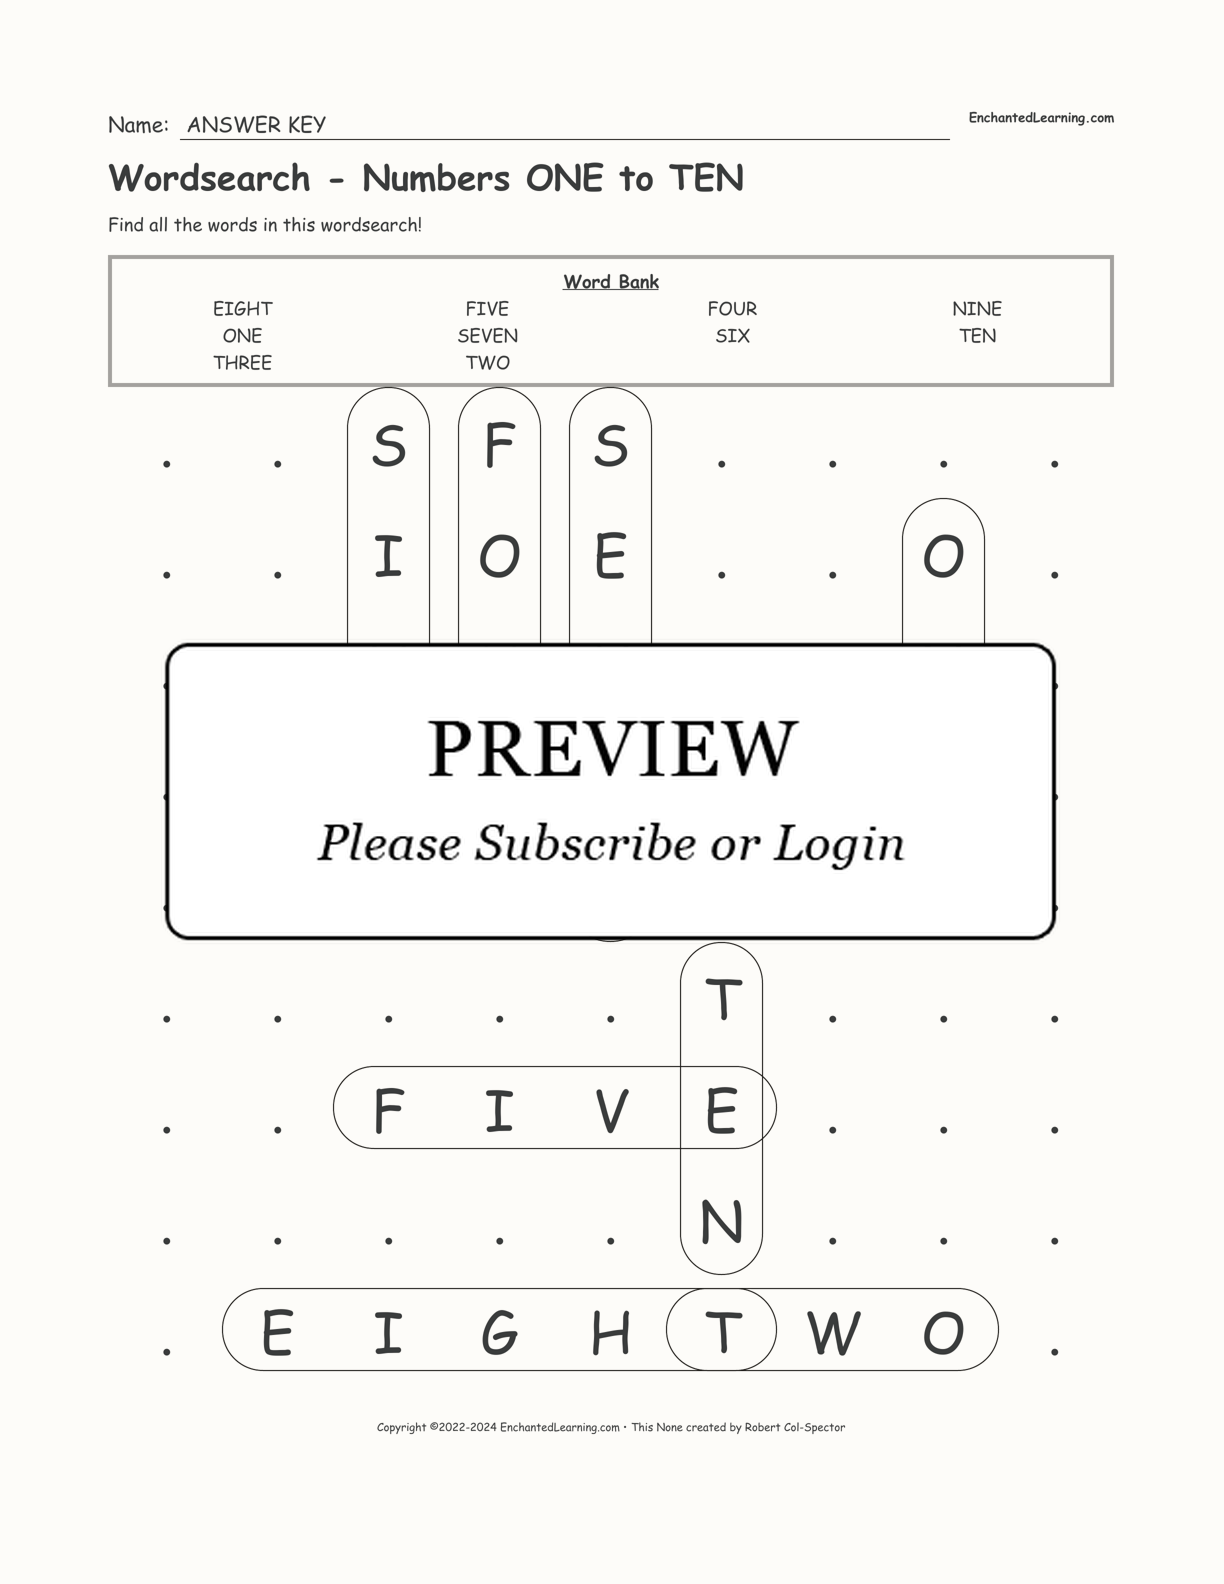 Wordsearch - Numbers ONE to TEN interactive worksheet page 2